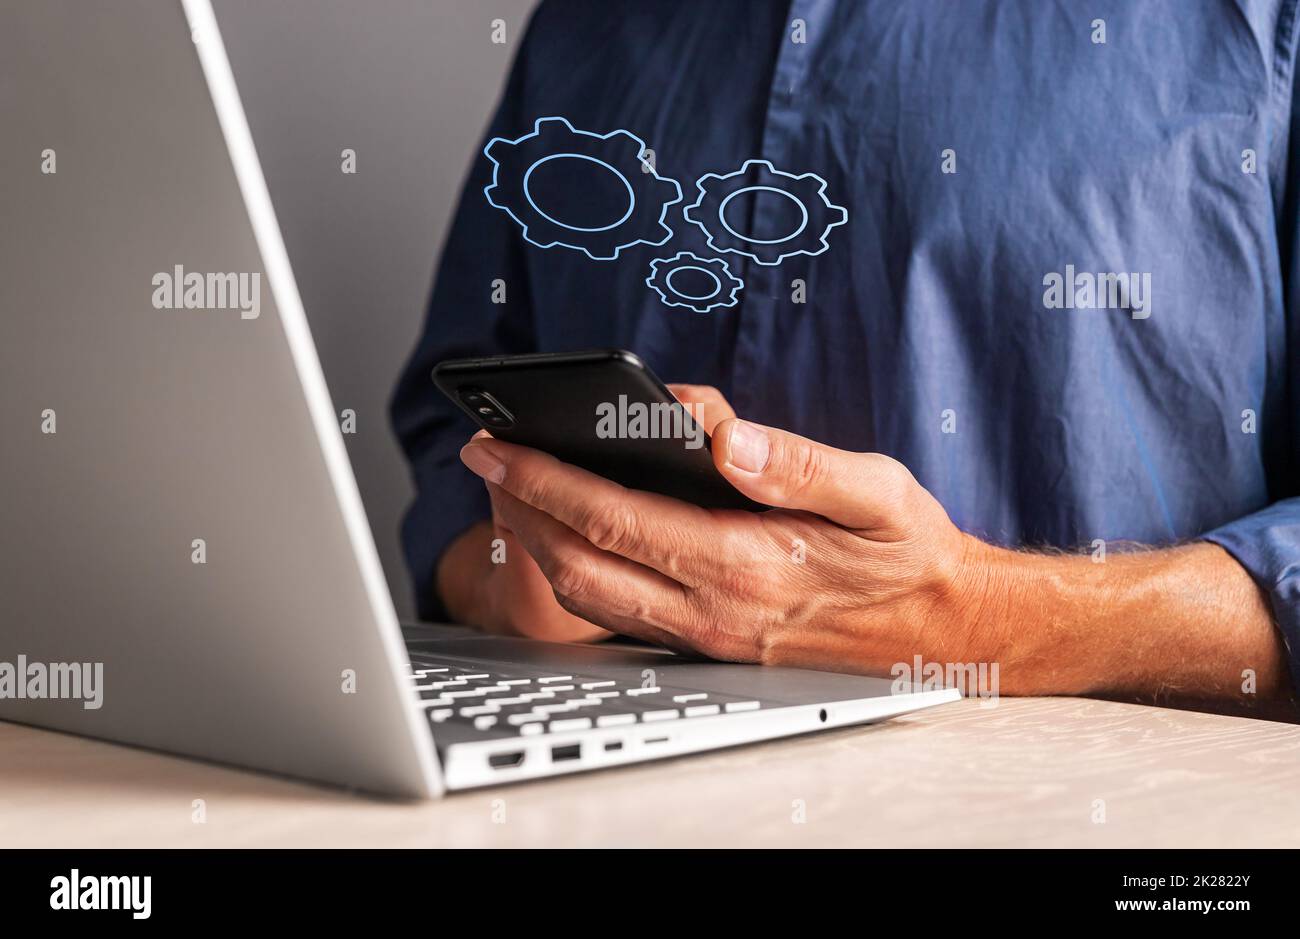 Man holding phone with virtual gears while working on laptop. Mobile settings or strategy, process organization, business idea concept. High quality photo Stock Photo